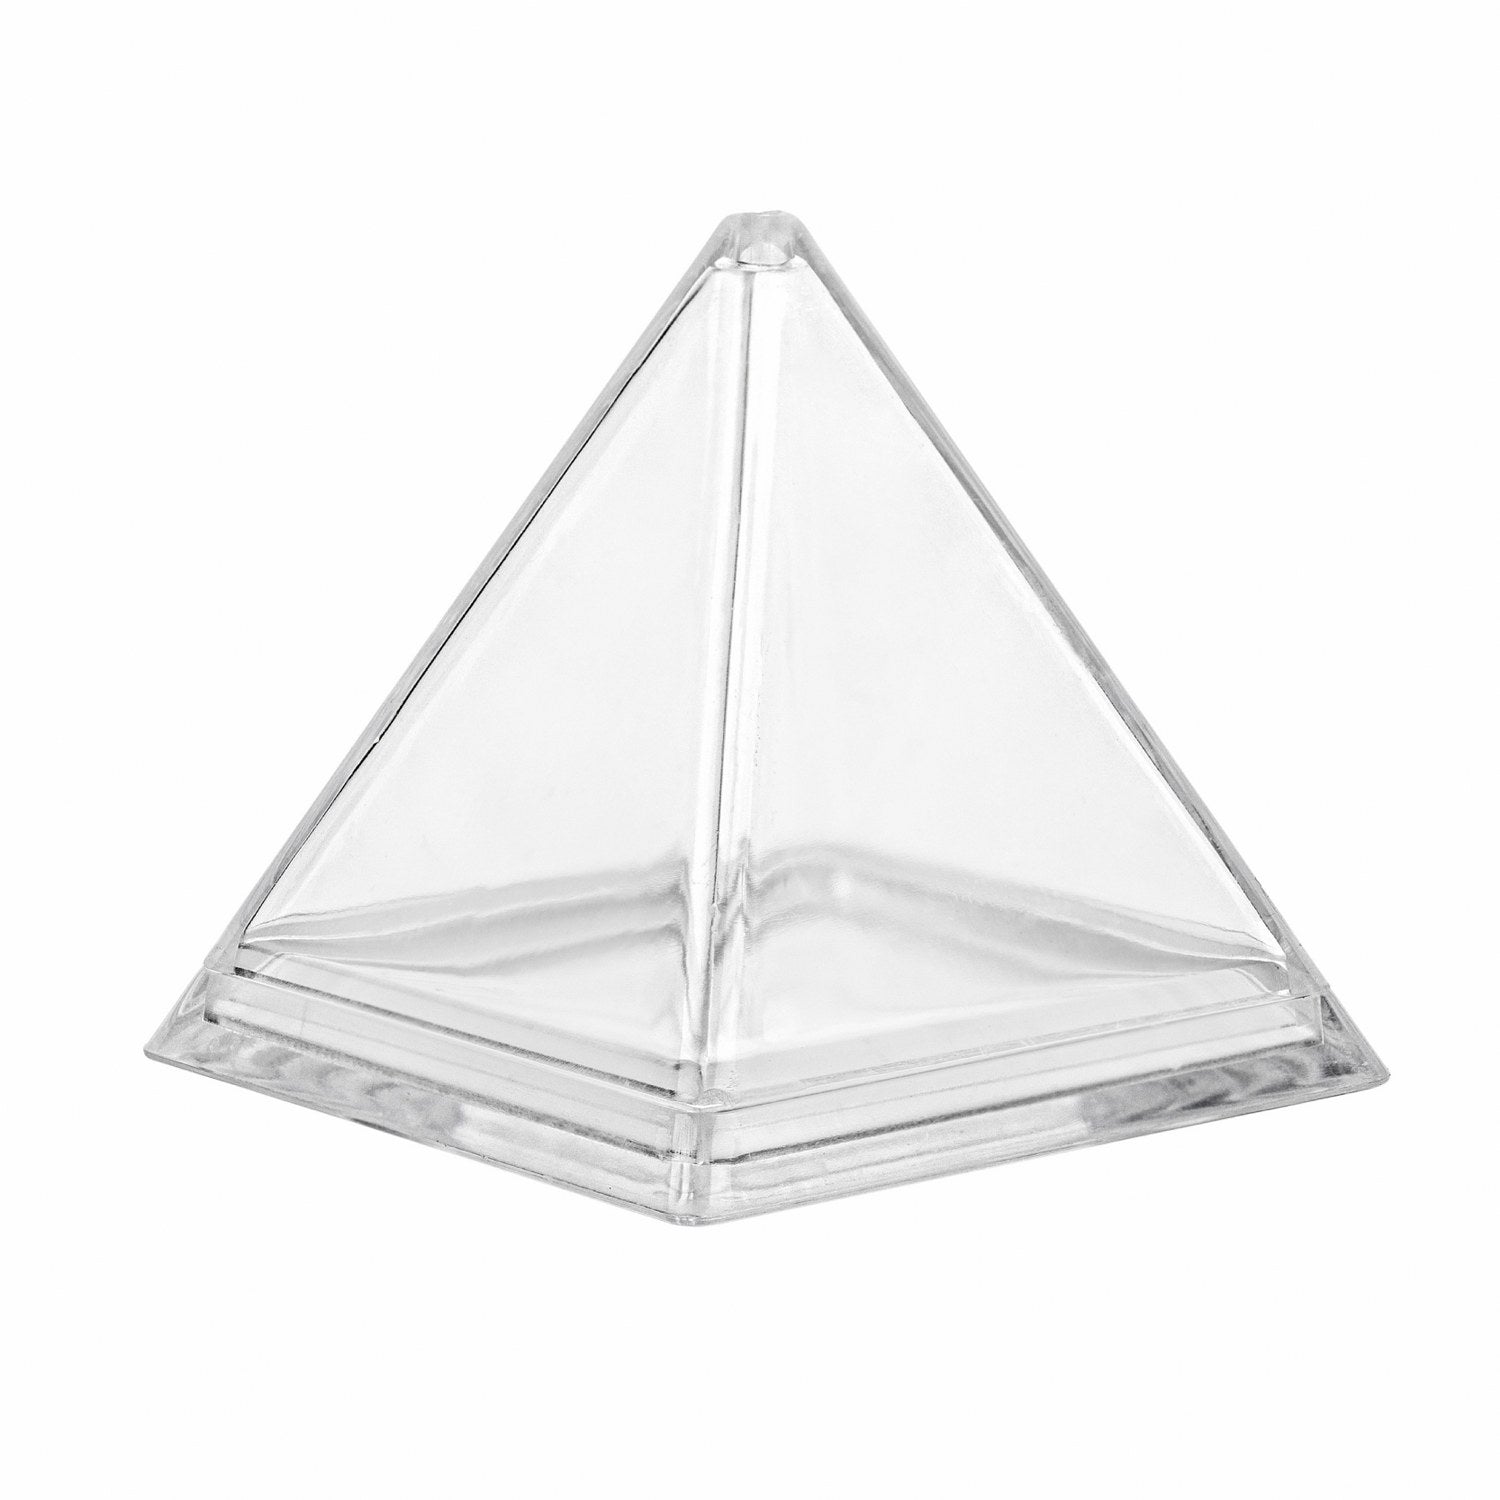 House Shaped Acrylic Candy Boxes 12 Pack 2.83X2.08X1.02